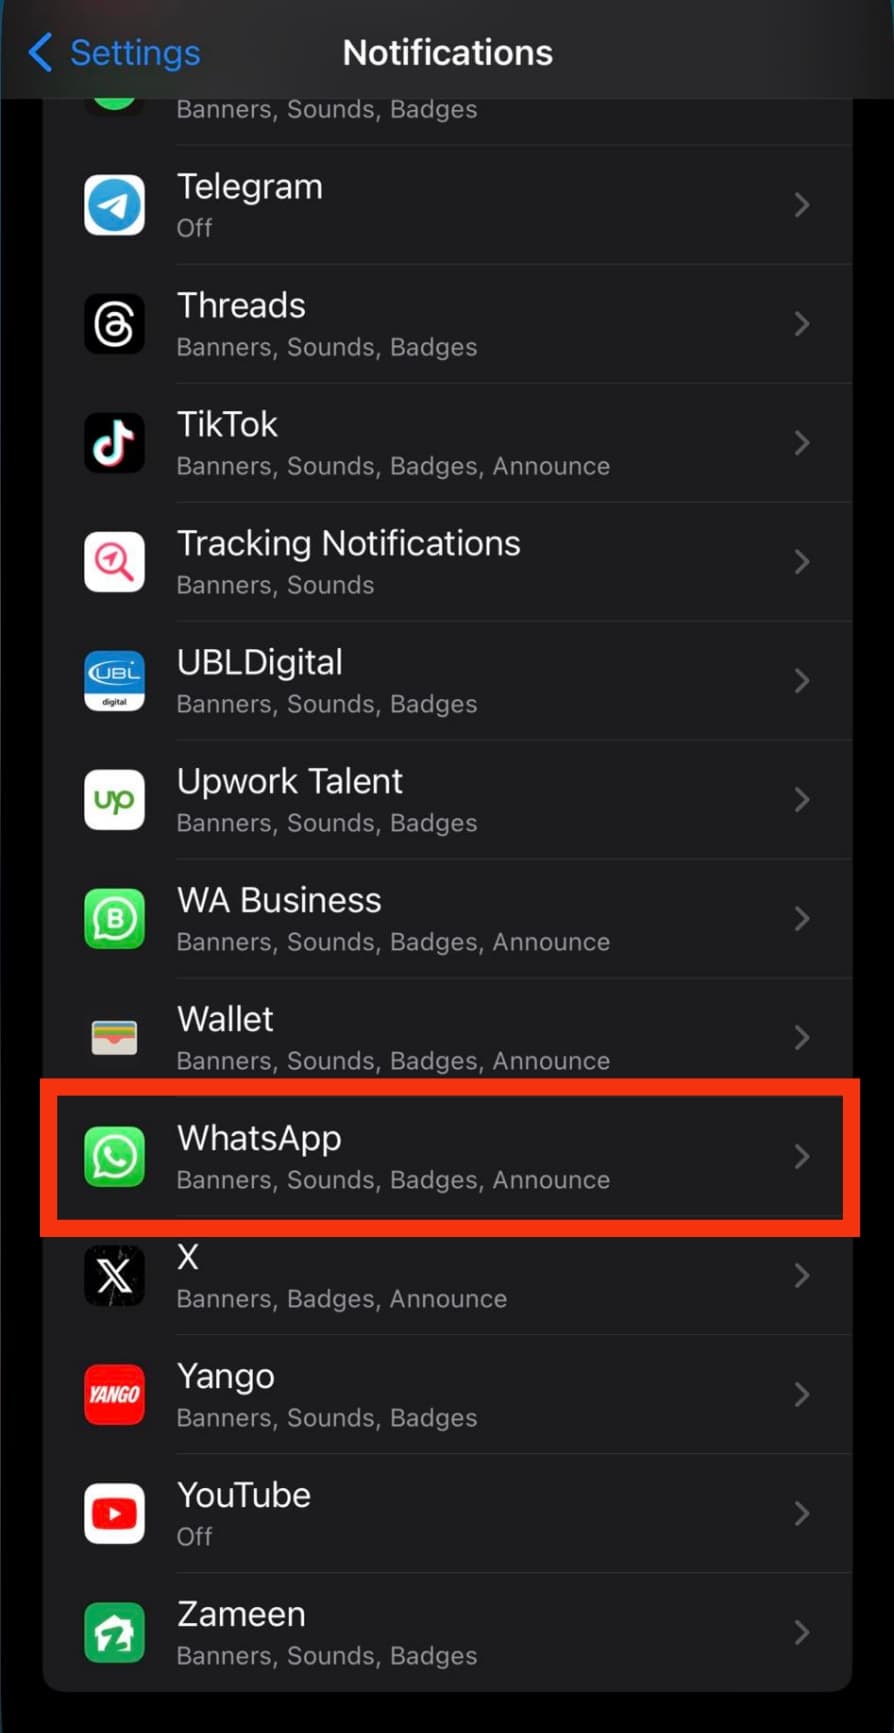 Scroll Down And Select Whatsapp